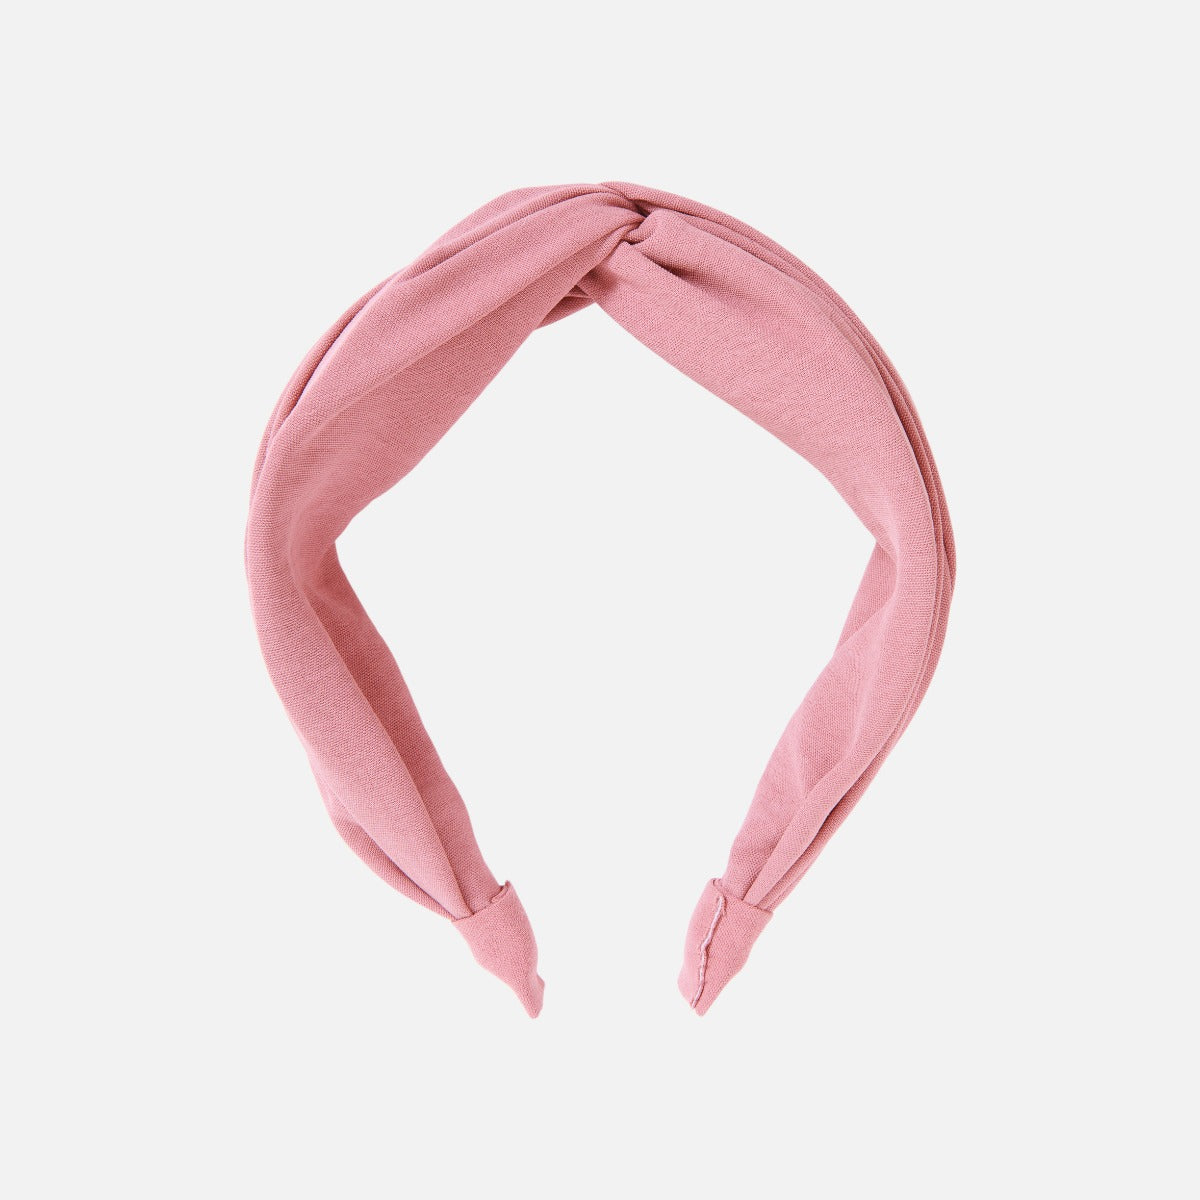 Large light pink hair hoop with knot